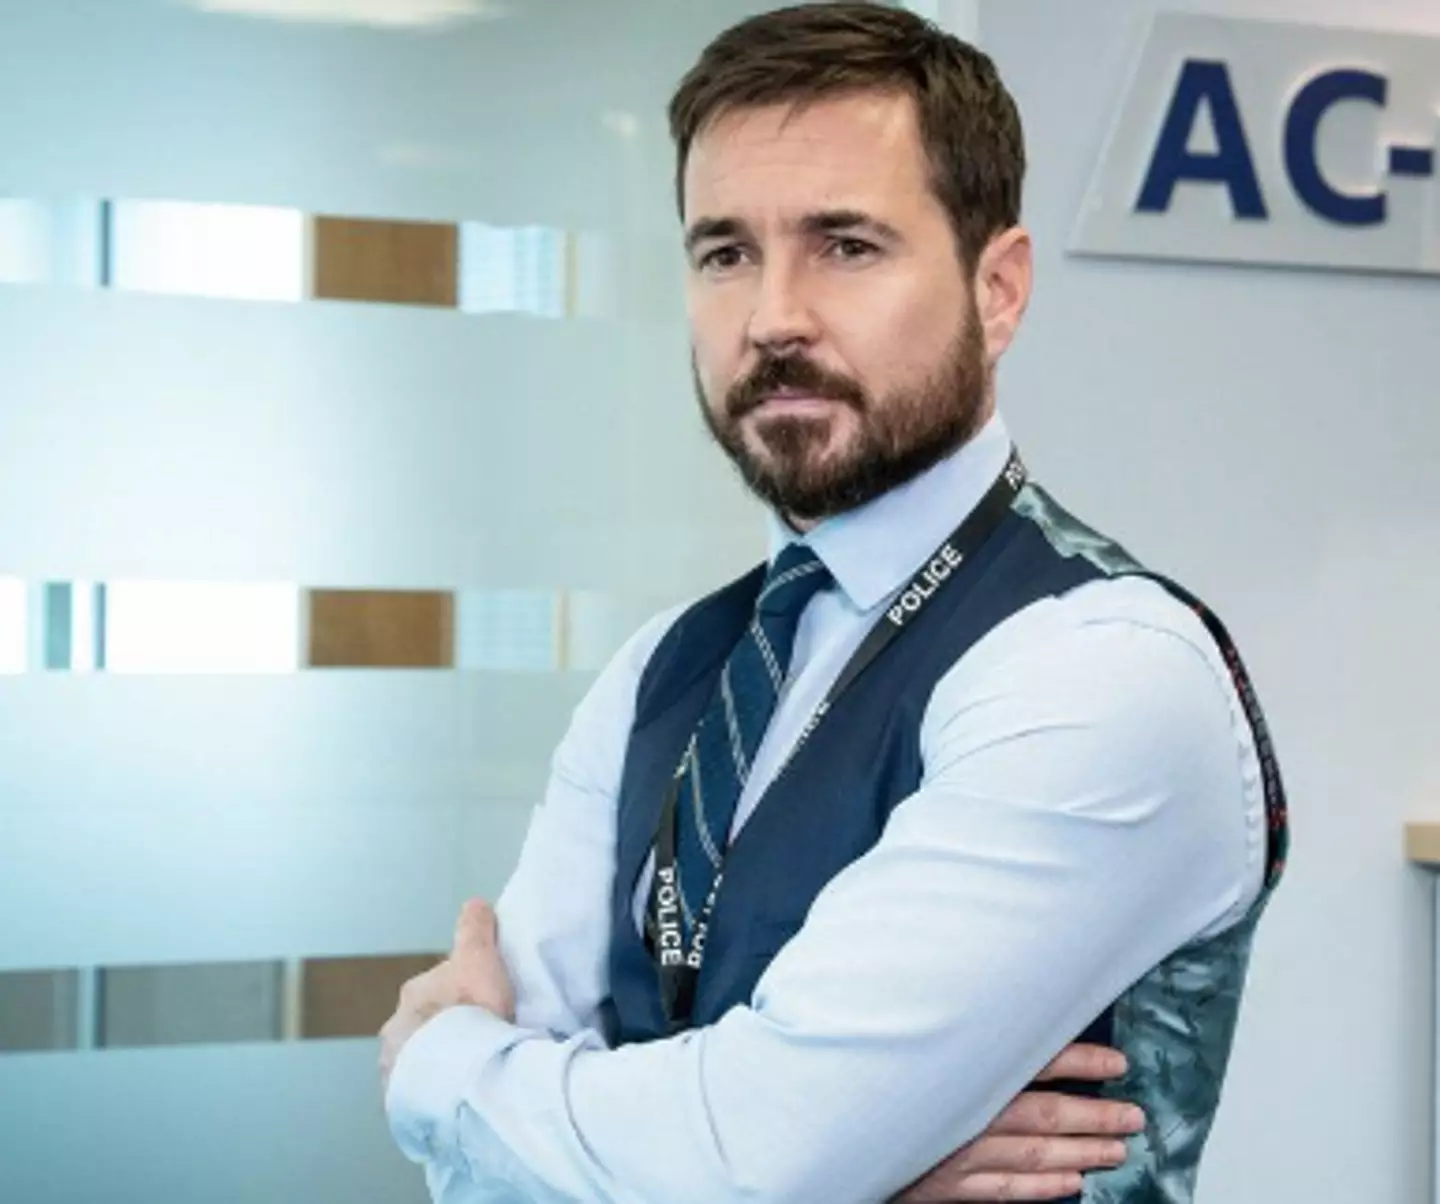 Fans will know Compston from Line Of Duty (